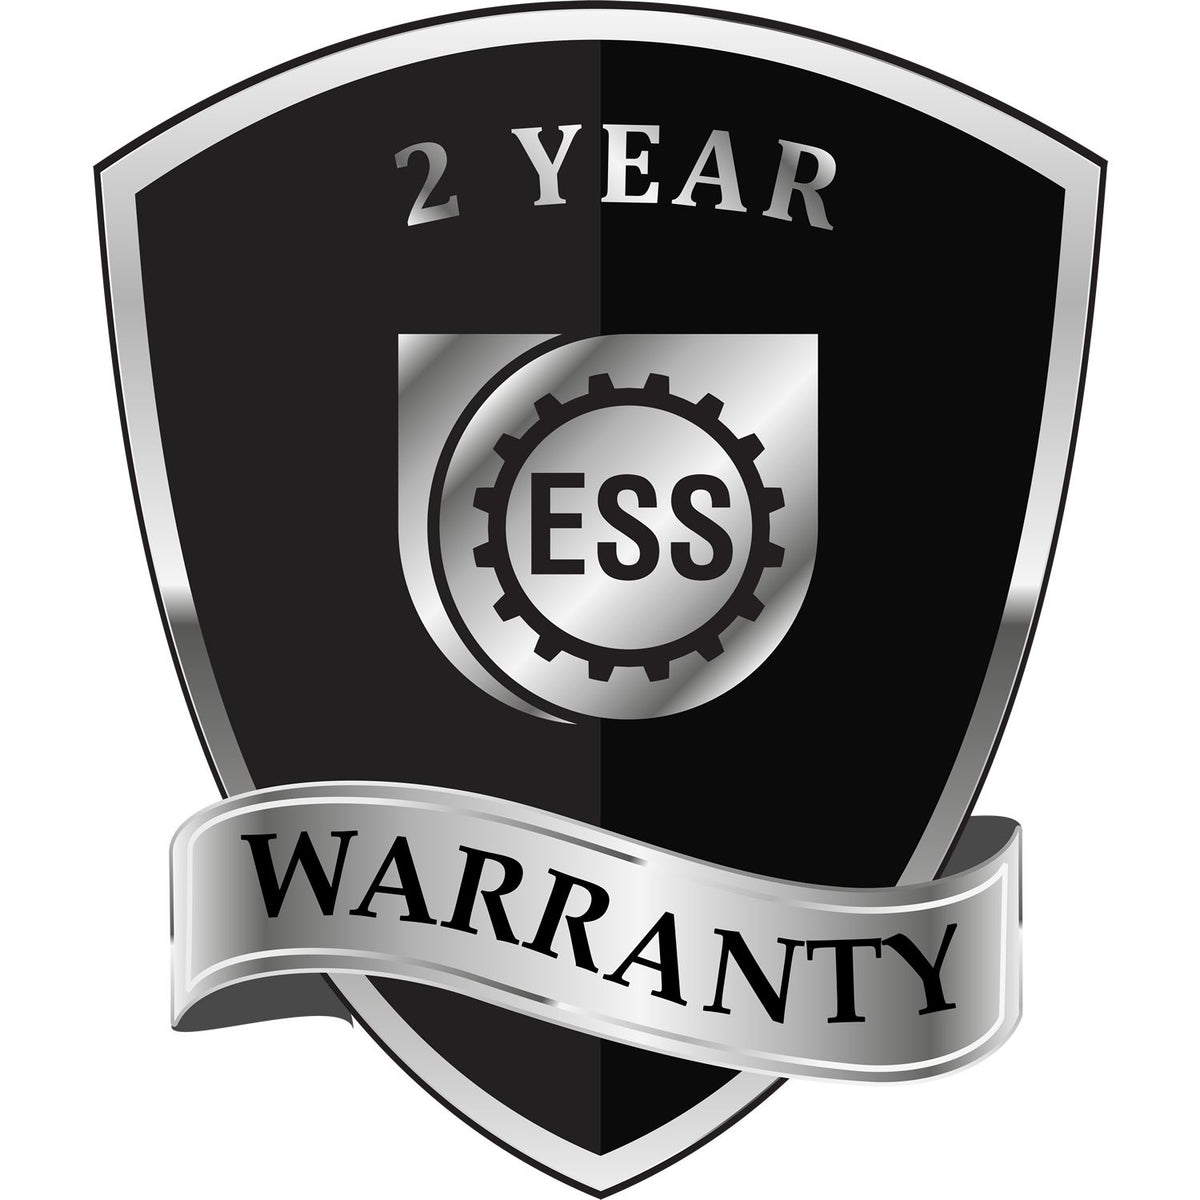 A badge or emblem showing a warranty icon for the Missouri Engineer Desk Seal